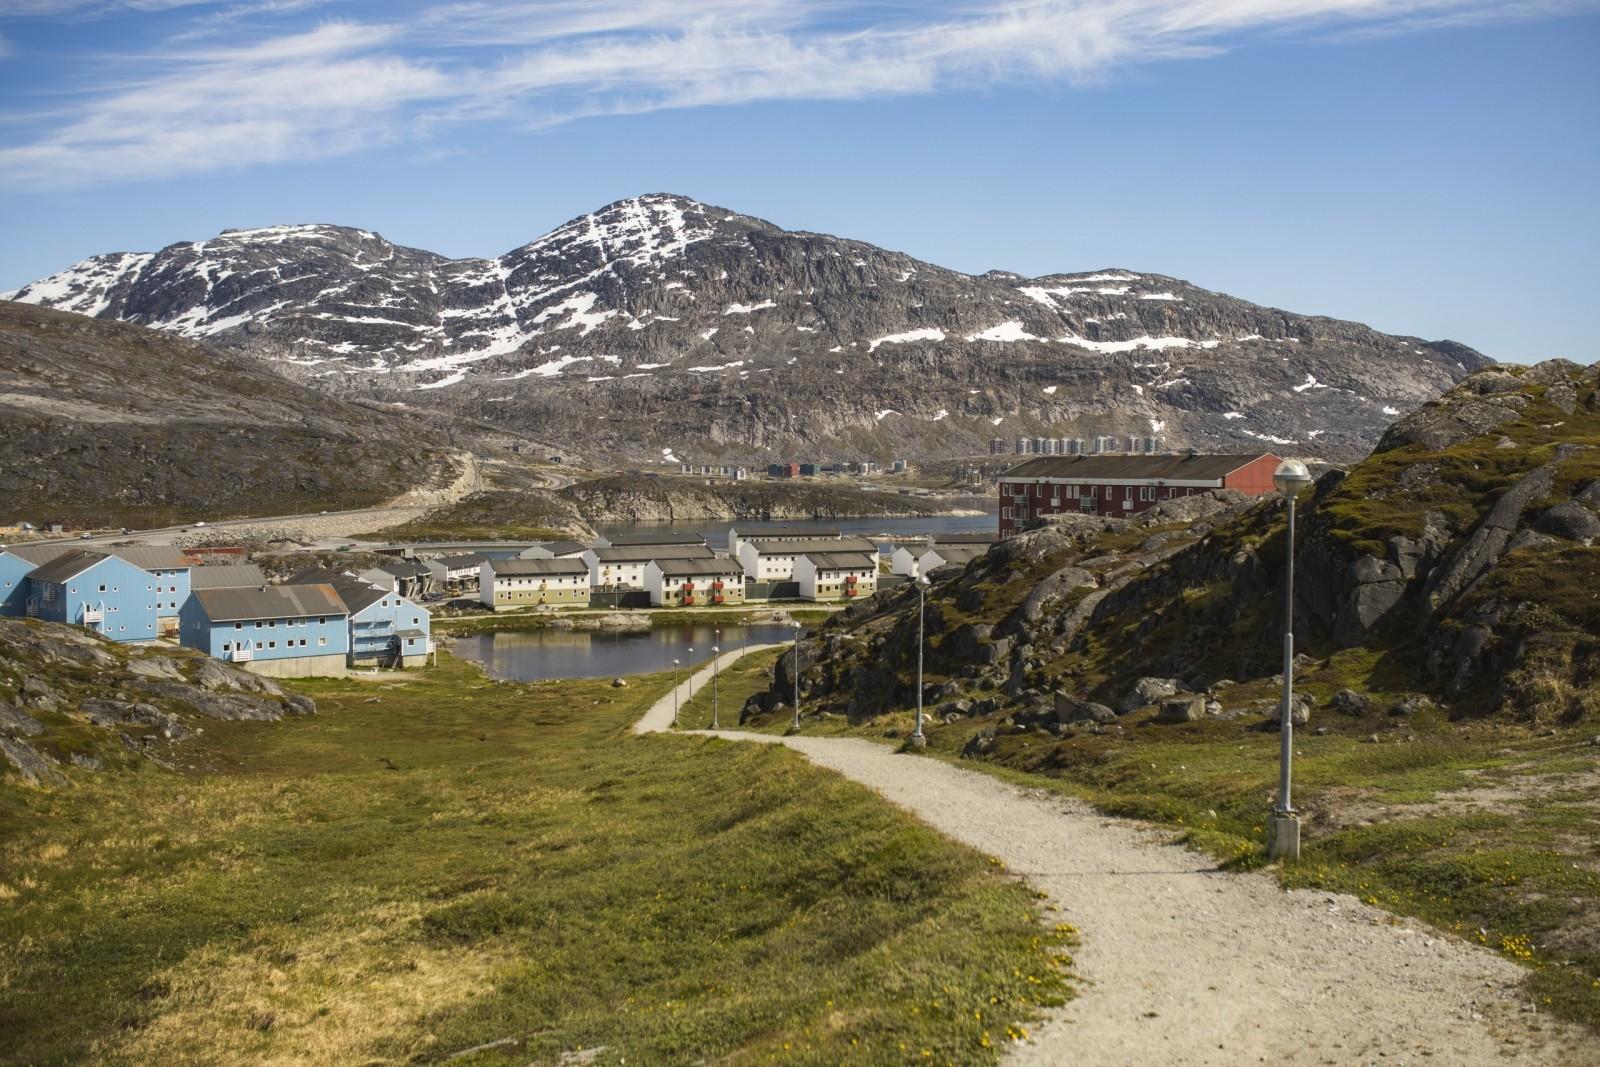 After-The view from Nuussuaq area towards Qinngorput and Mt.Ukussissat in Nuuk